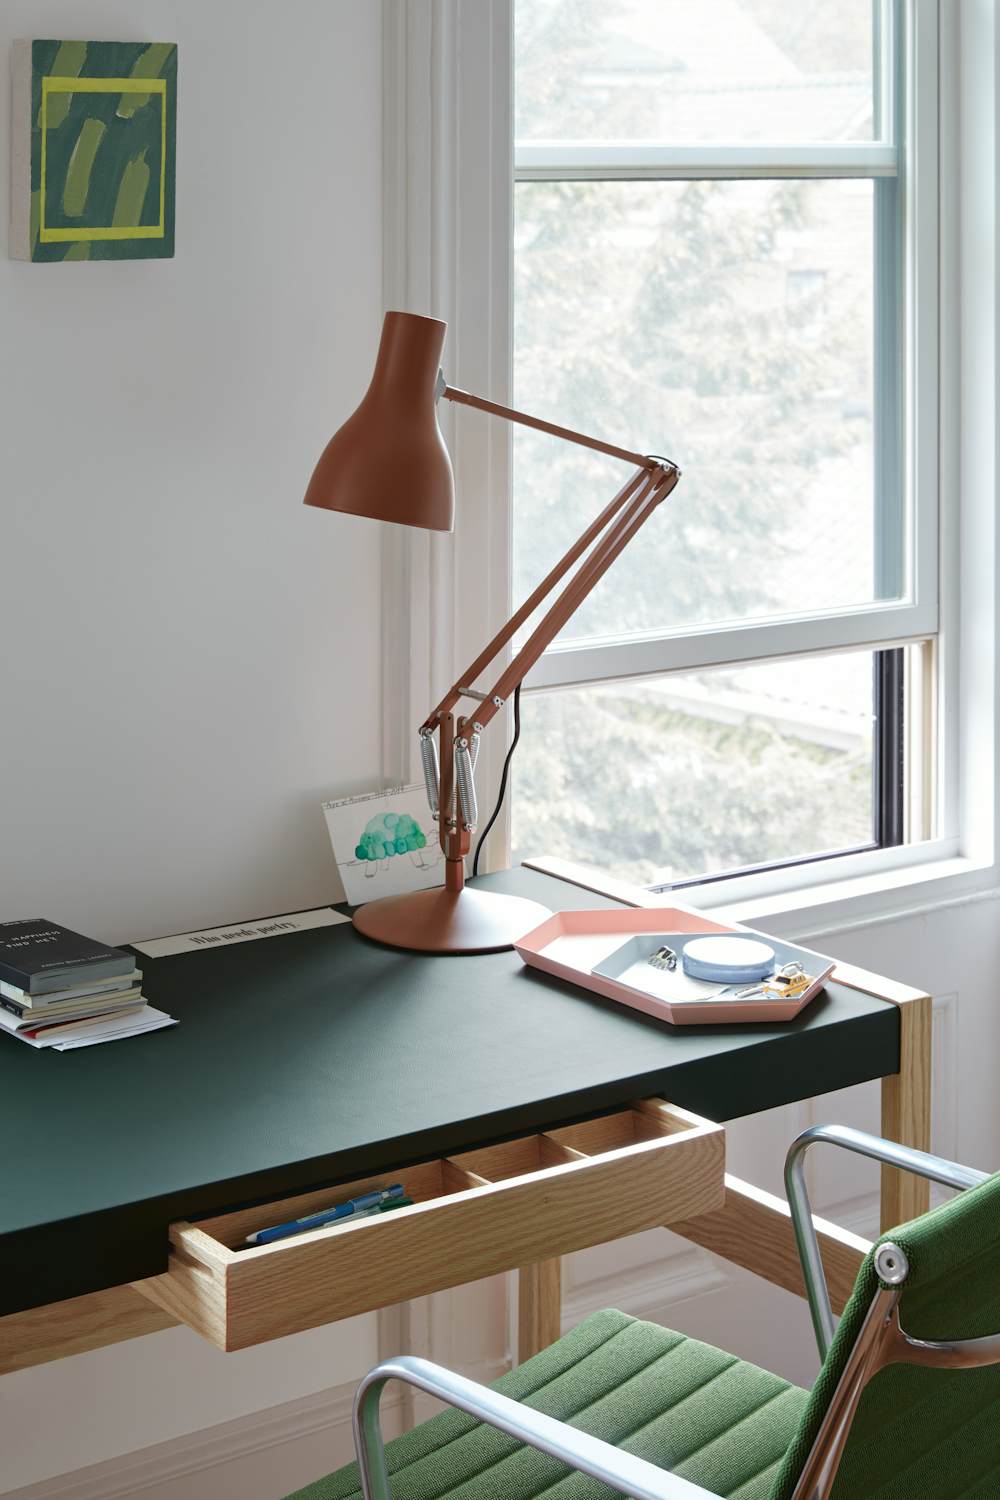 Type 75 Task Lamp on a Risom Desk in a home office setting